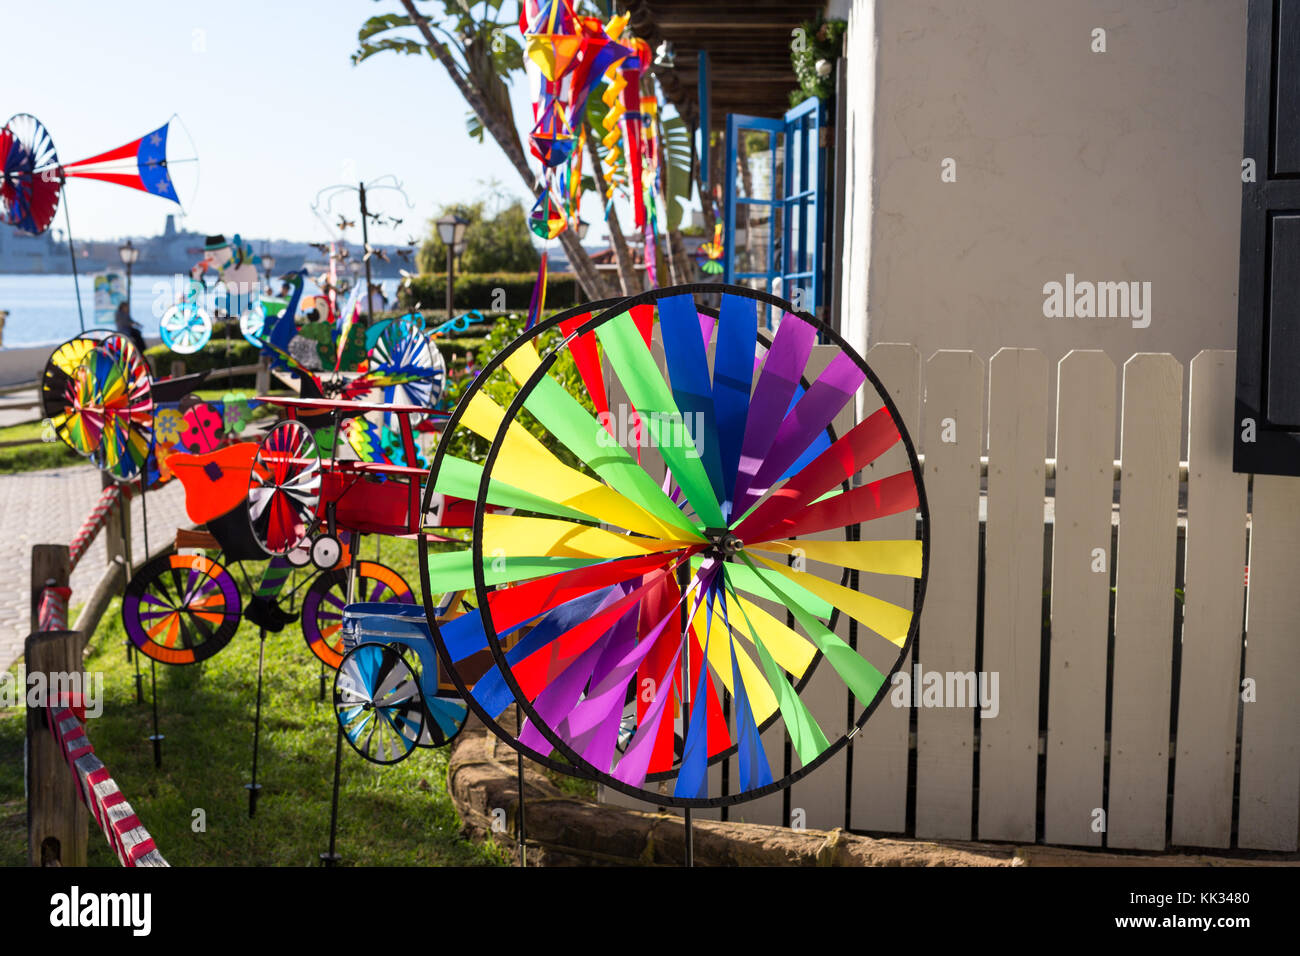 Colorful flags and wind spinners outside of a shop in Seaport Village, San Diego, California, USA Stock Photo